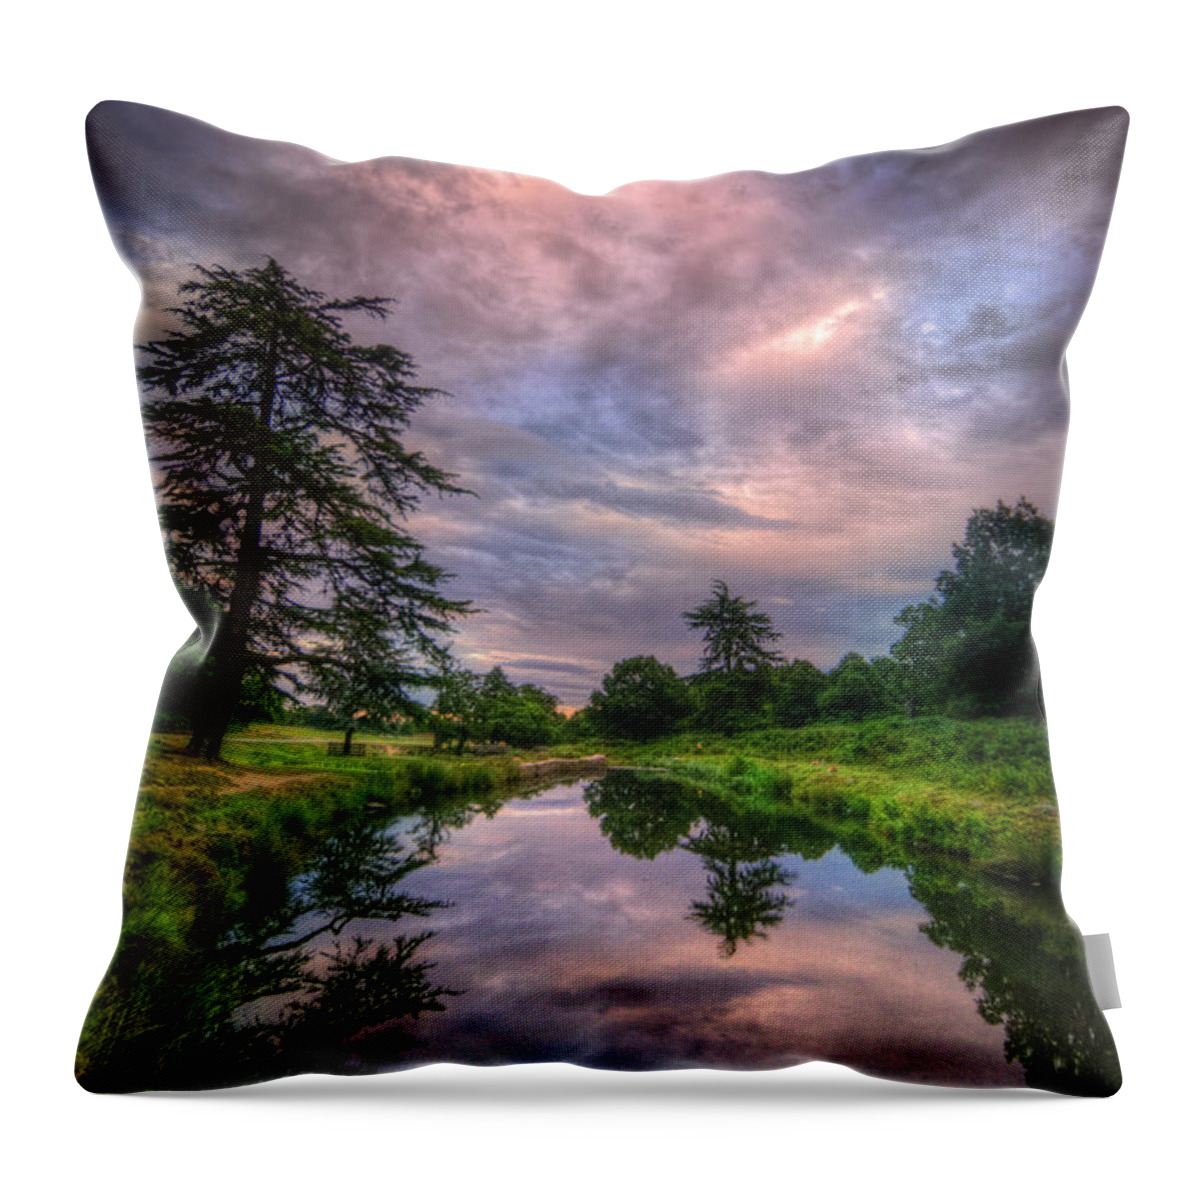 Landscape Throw Pillow featuring the photograph Pink Flow by Yhun Suarez